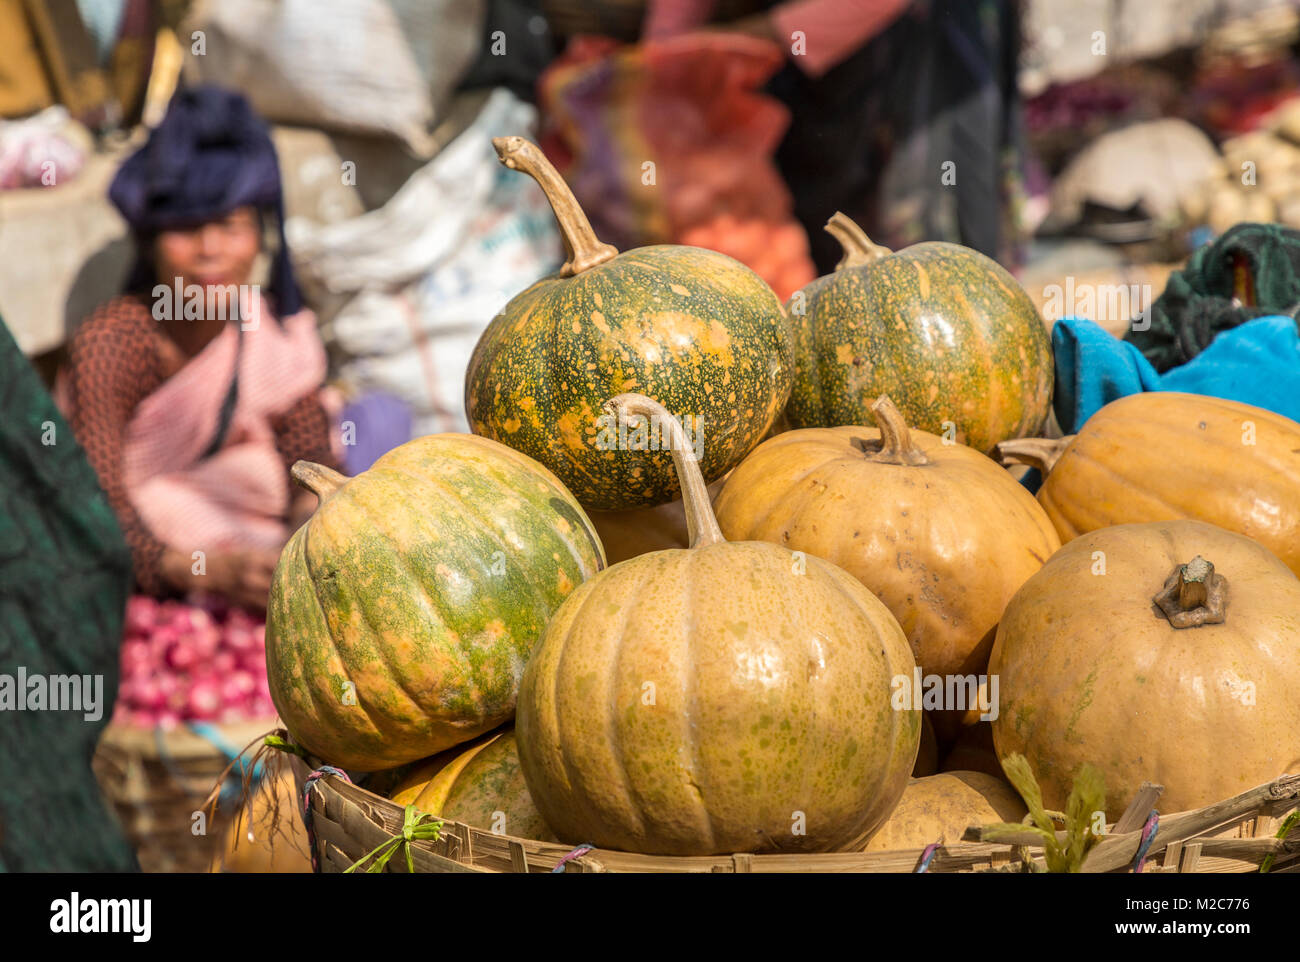 Gourds on sale in market, Shillong, Meghalaya, India Stock Photo